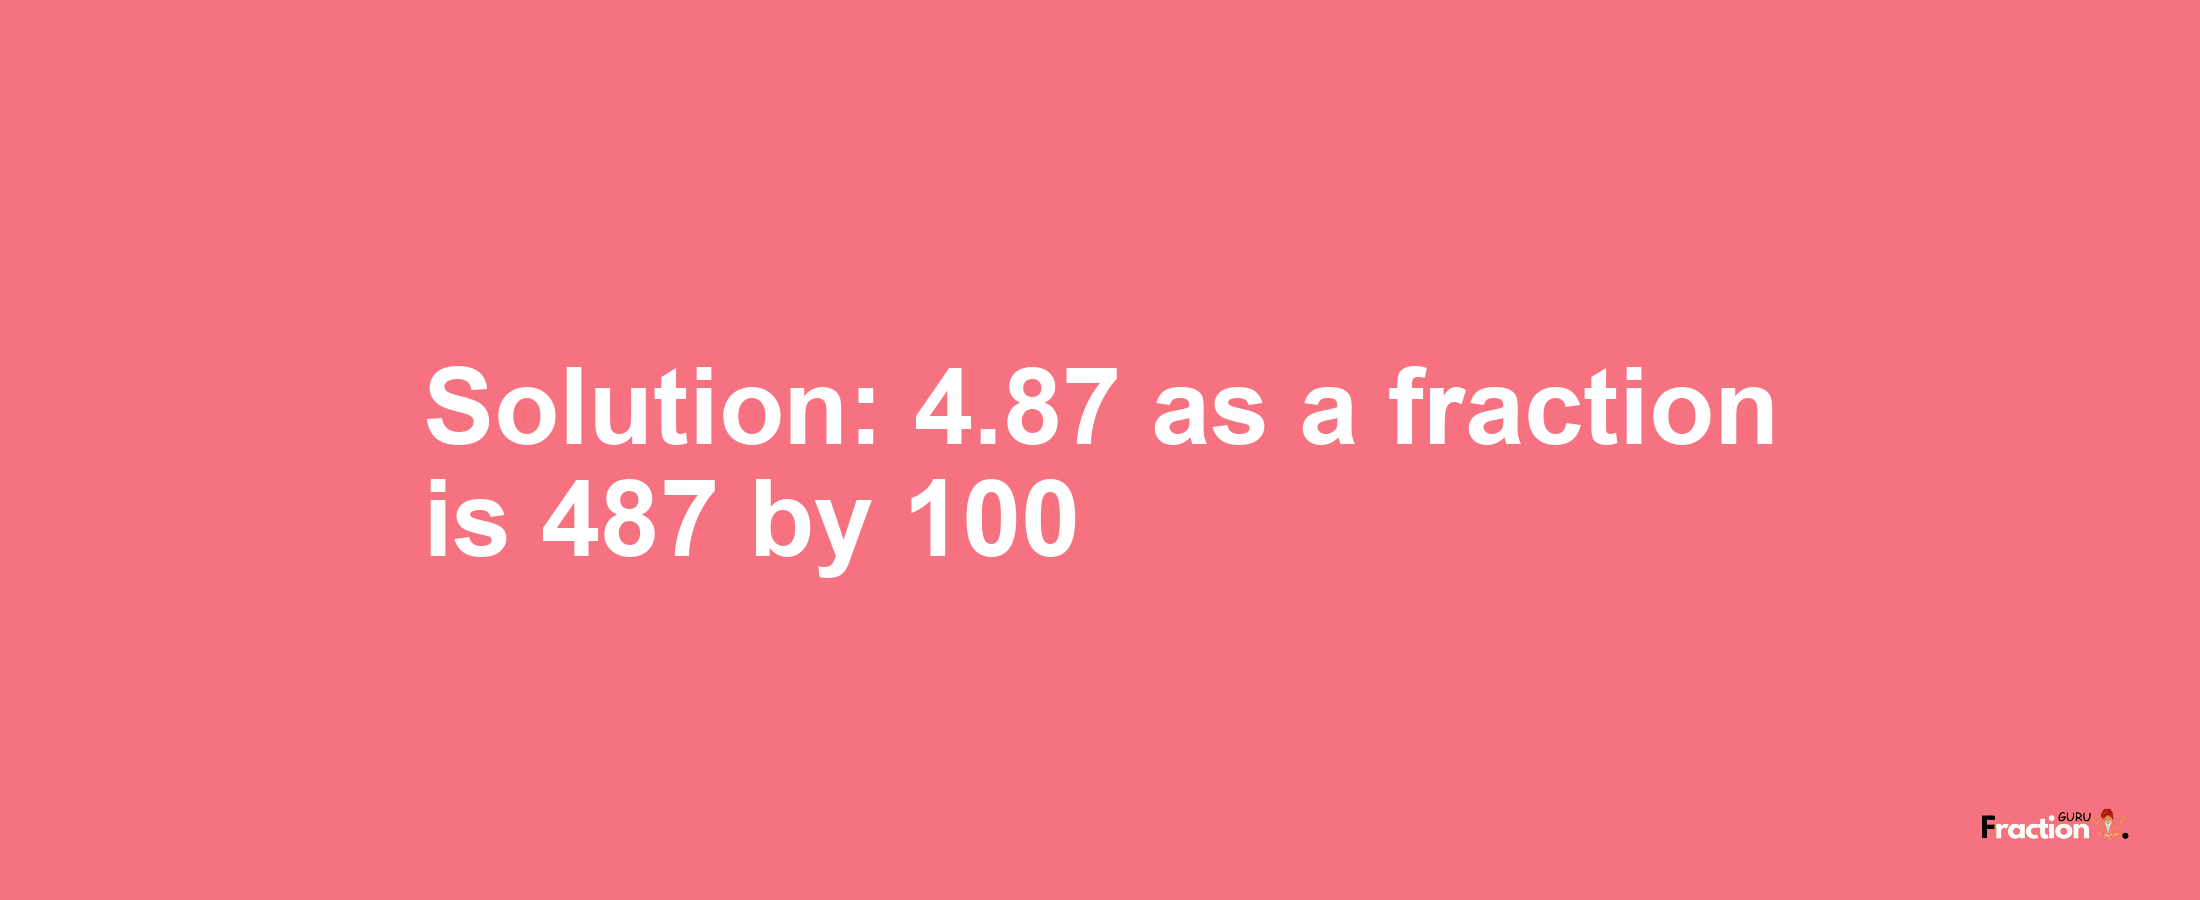 Solution:4.87 as a fraction is 487/100